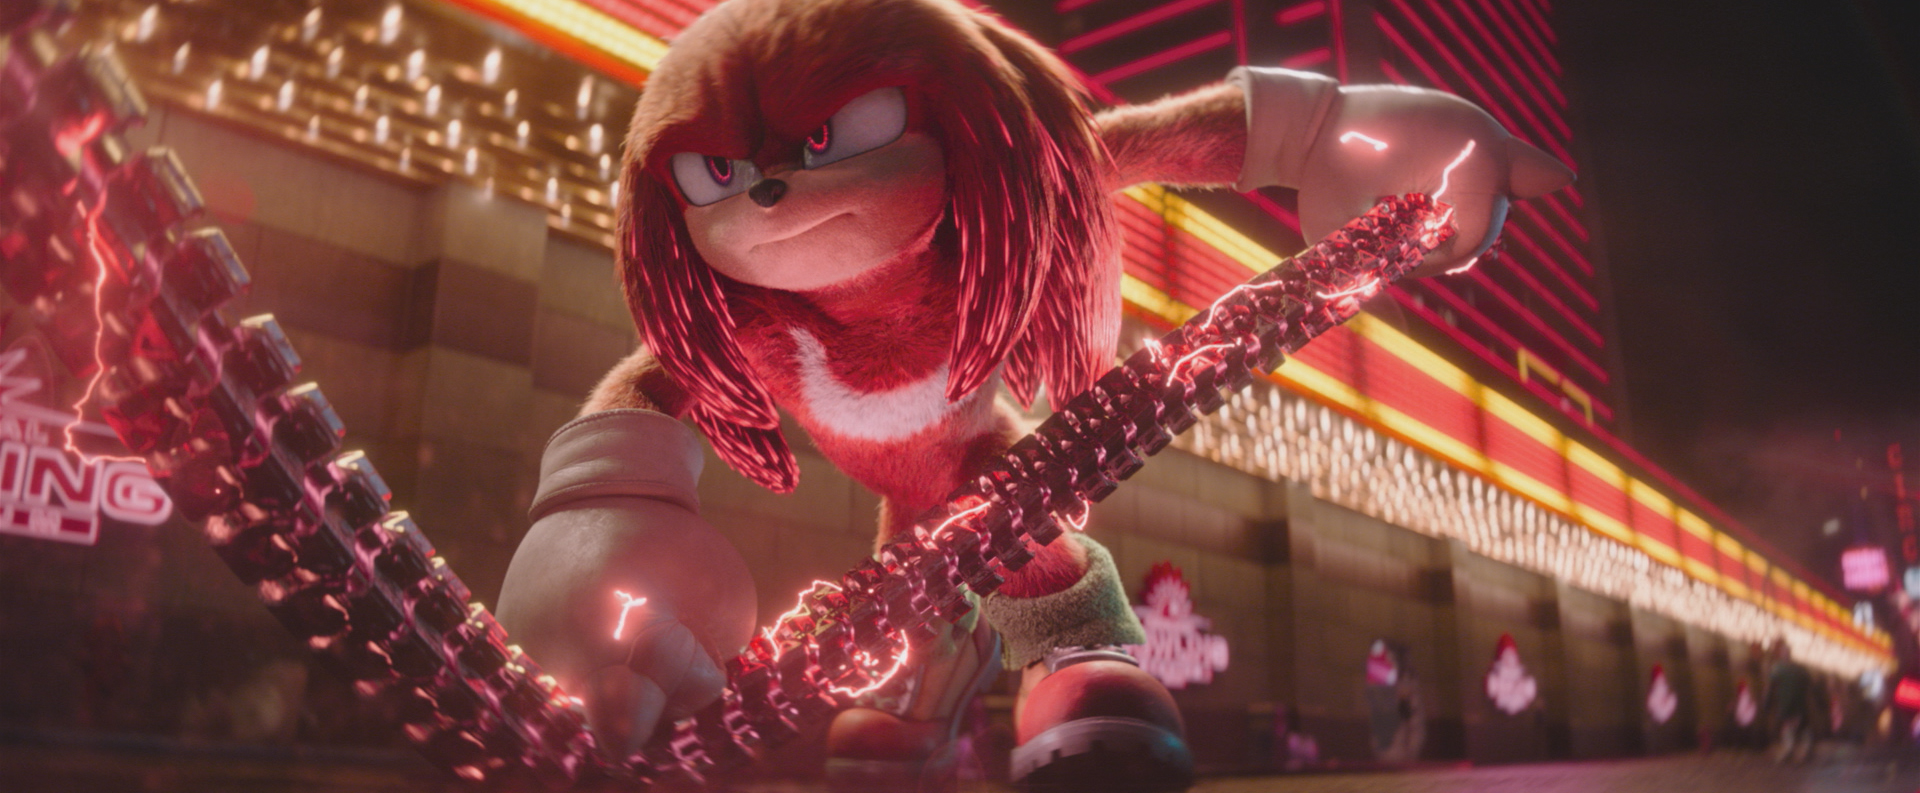 'Knuckles' Trailer Starring Idris Elba As The Titular 'Sonic' Character Released By Paramount+